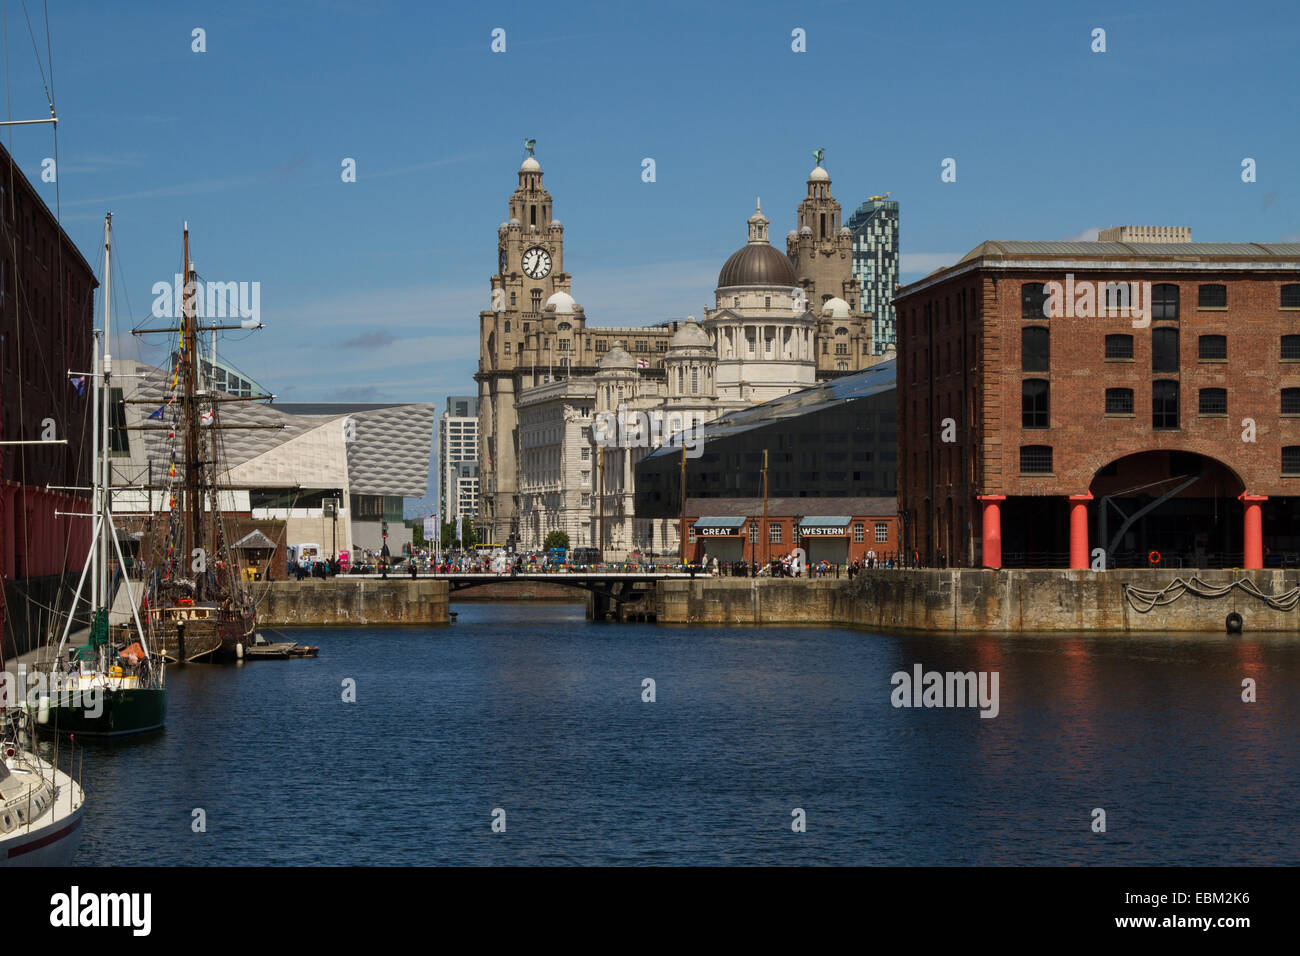 Liver Building from the Albert Dock, Liverpool showing sailing vessels and dock buildings Stock Photo